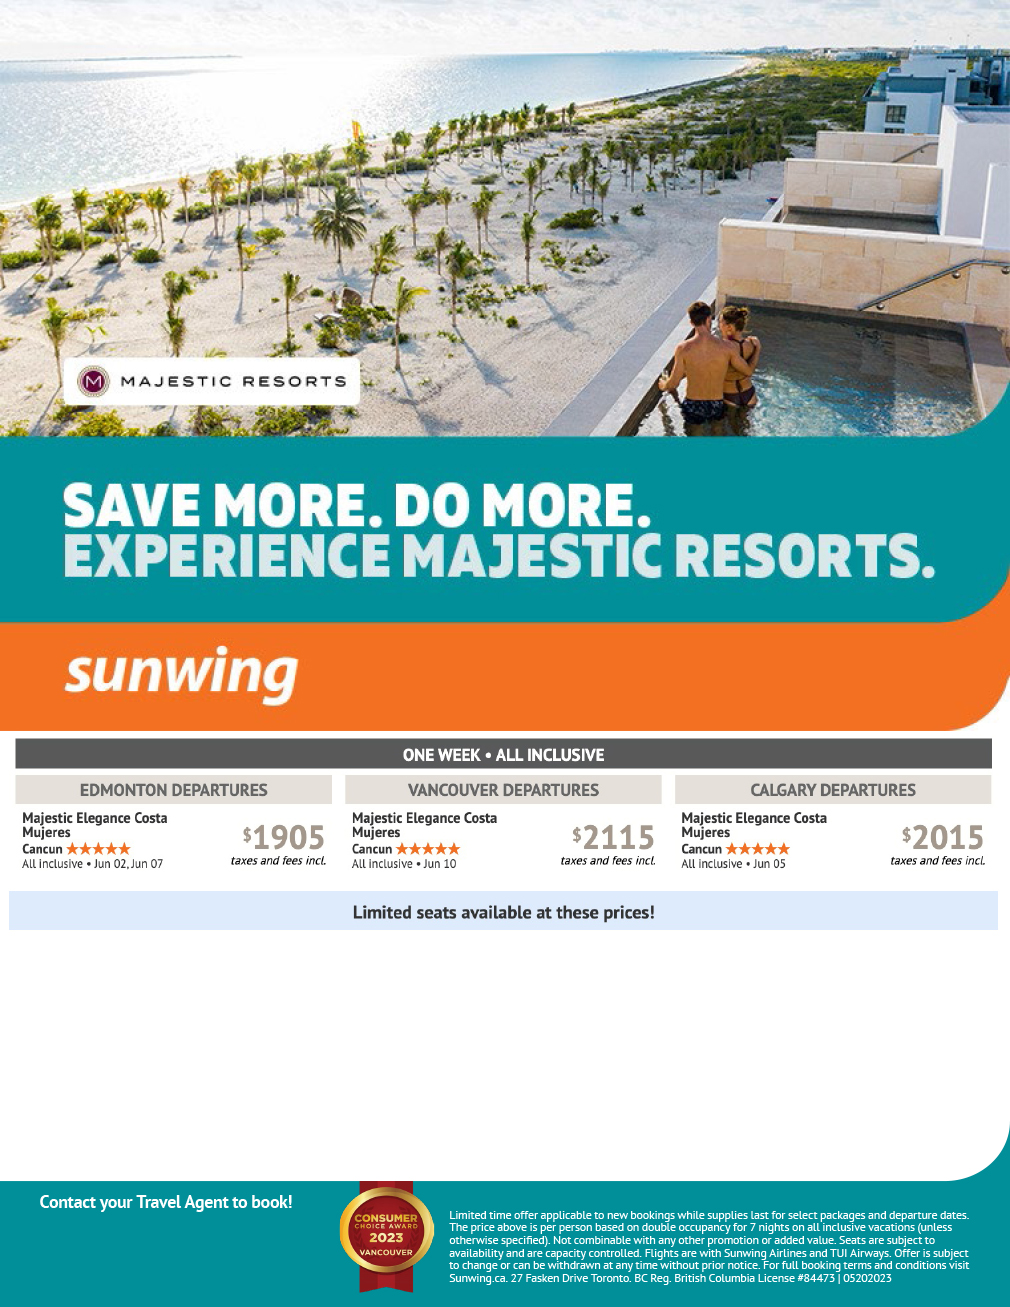 Save More. Do More. Experience Majestic Resorts